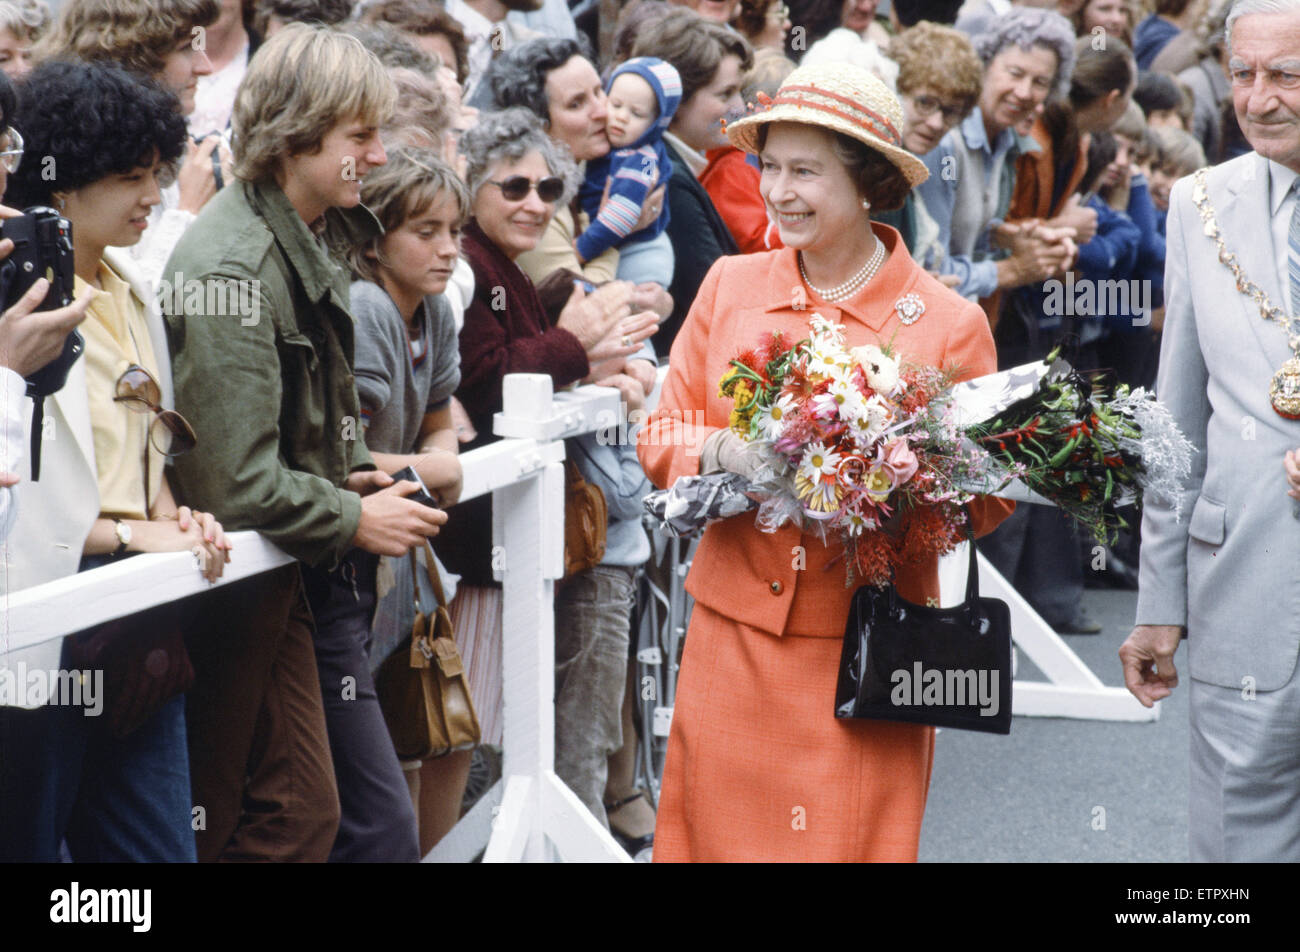 Royal Tour  of Australasia by Queen Elizabeth II and Prince Philip, Duke of Edinburgh. They flew out from London to New Zealand where they stayed  from the 12th to the  20th October 1981 before gong on to Australia for one day and ending in Sri Lanka from 21st to 25th October. Here Queen Elizabeth II greets enthusiastic crowd members who have gathered to see her. October 1981. Stock Photo